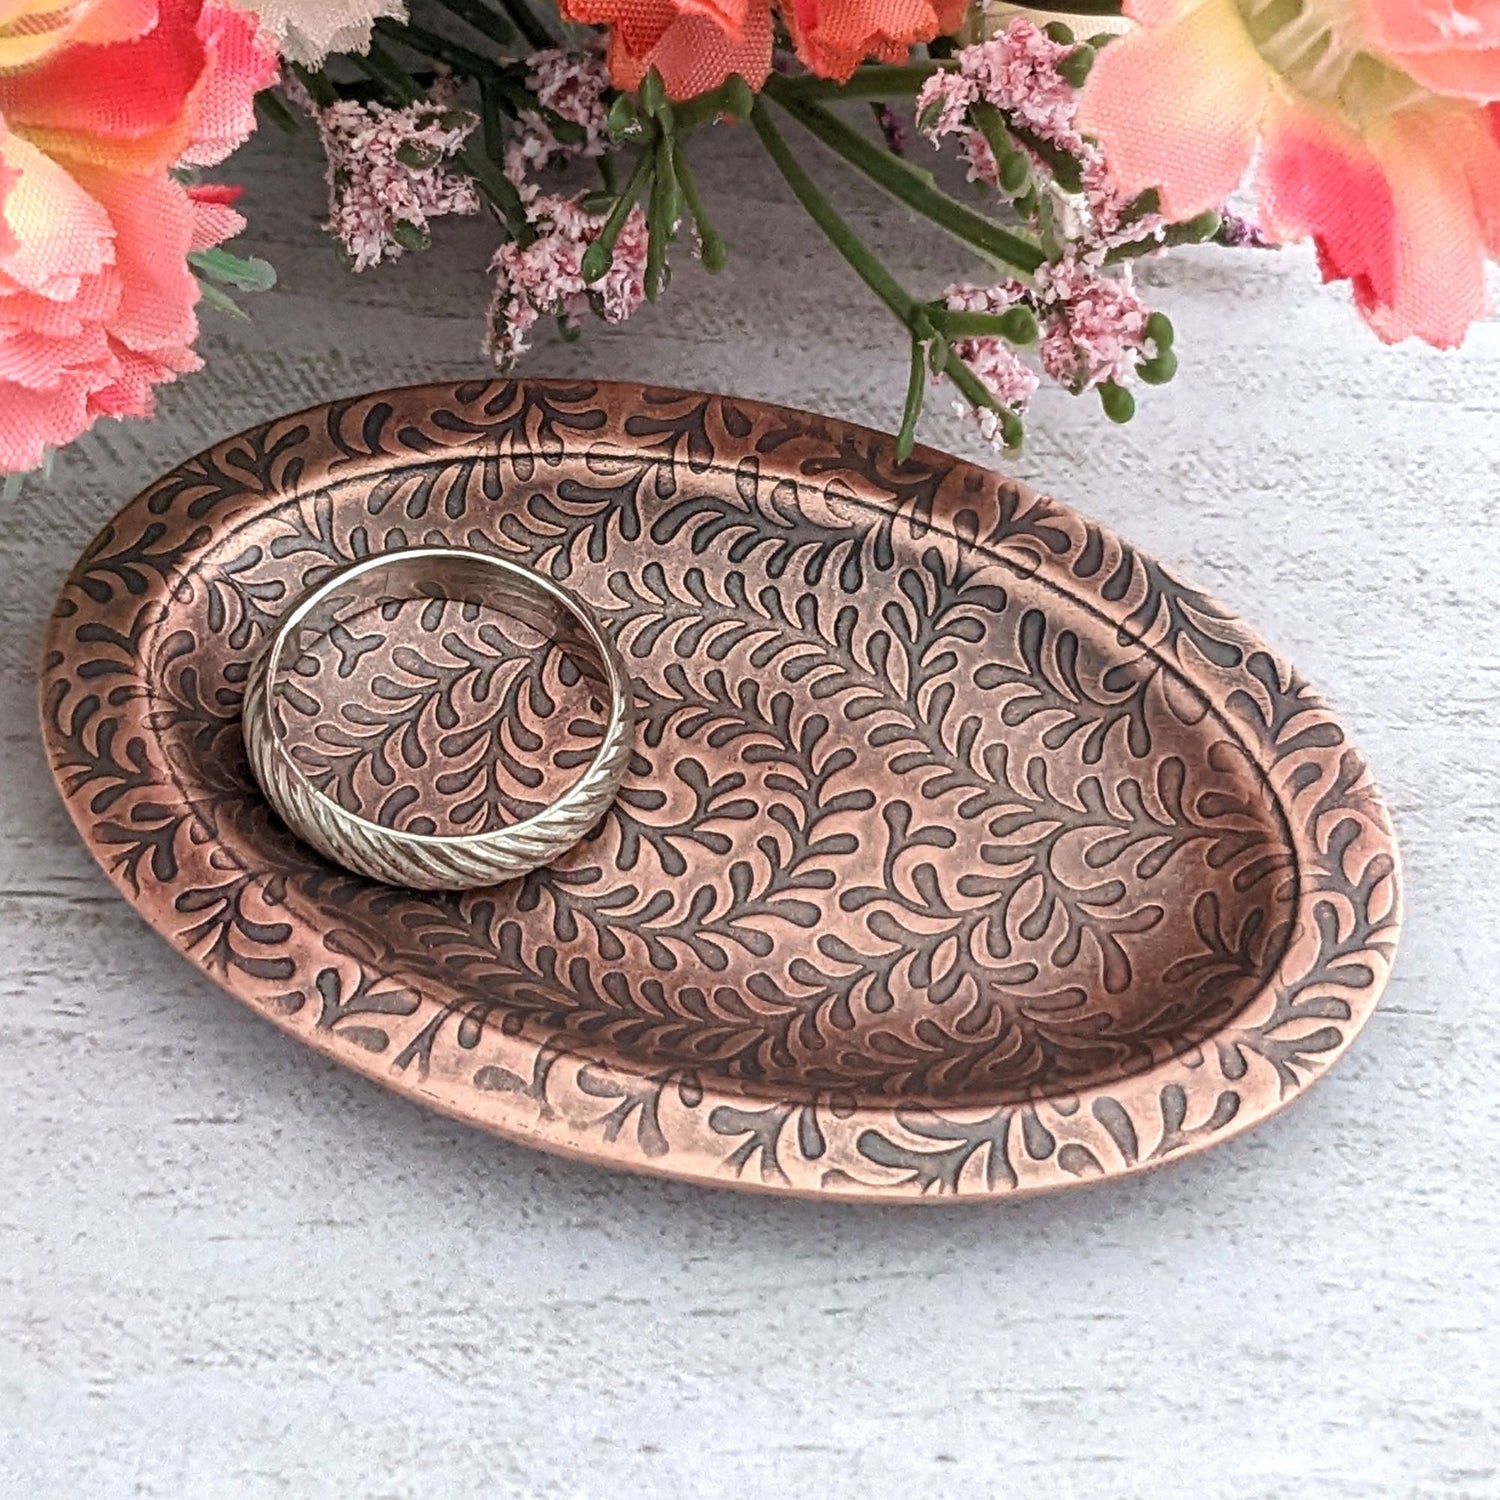 Copper oval ring dish with abstract fiddlehead fern pattern.  Dish is 2 inches by three inches with a raised lip.